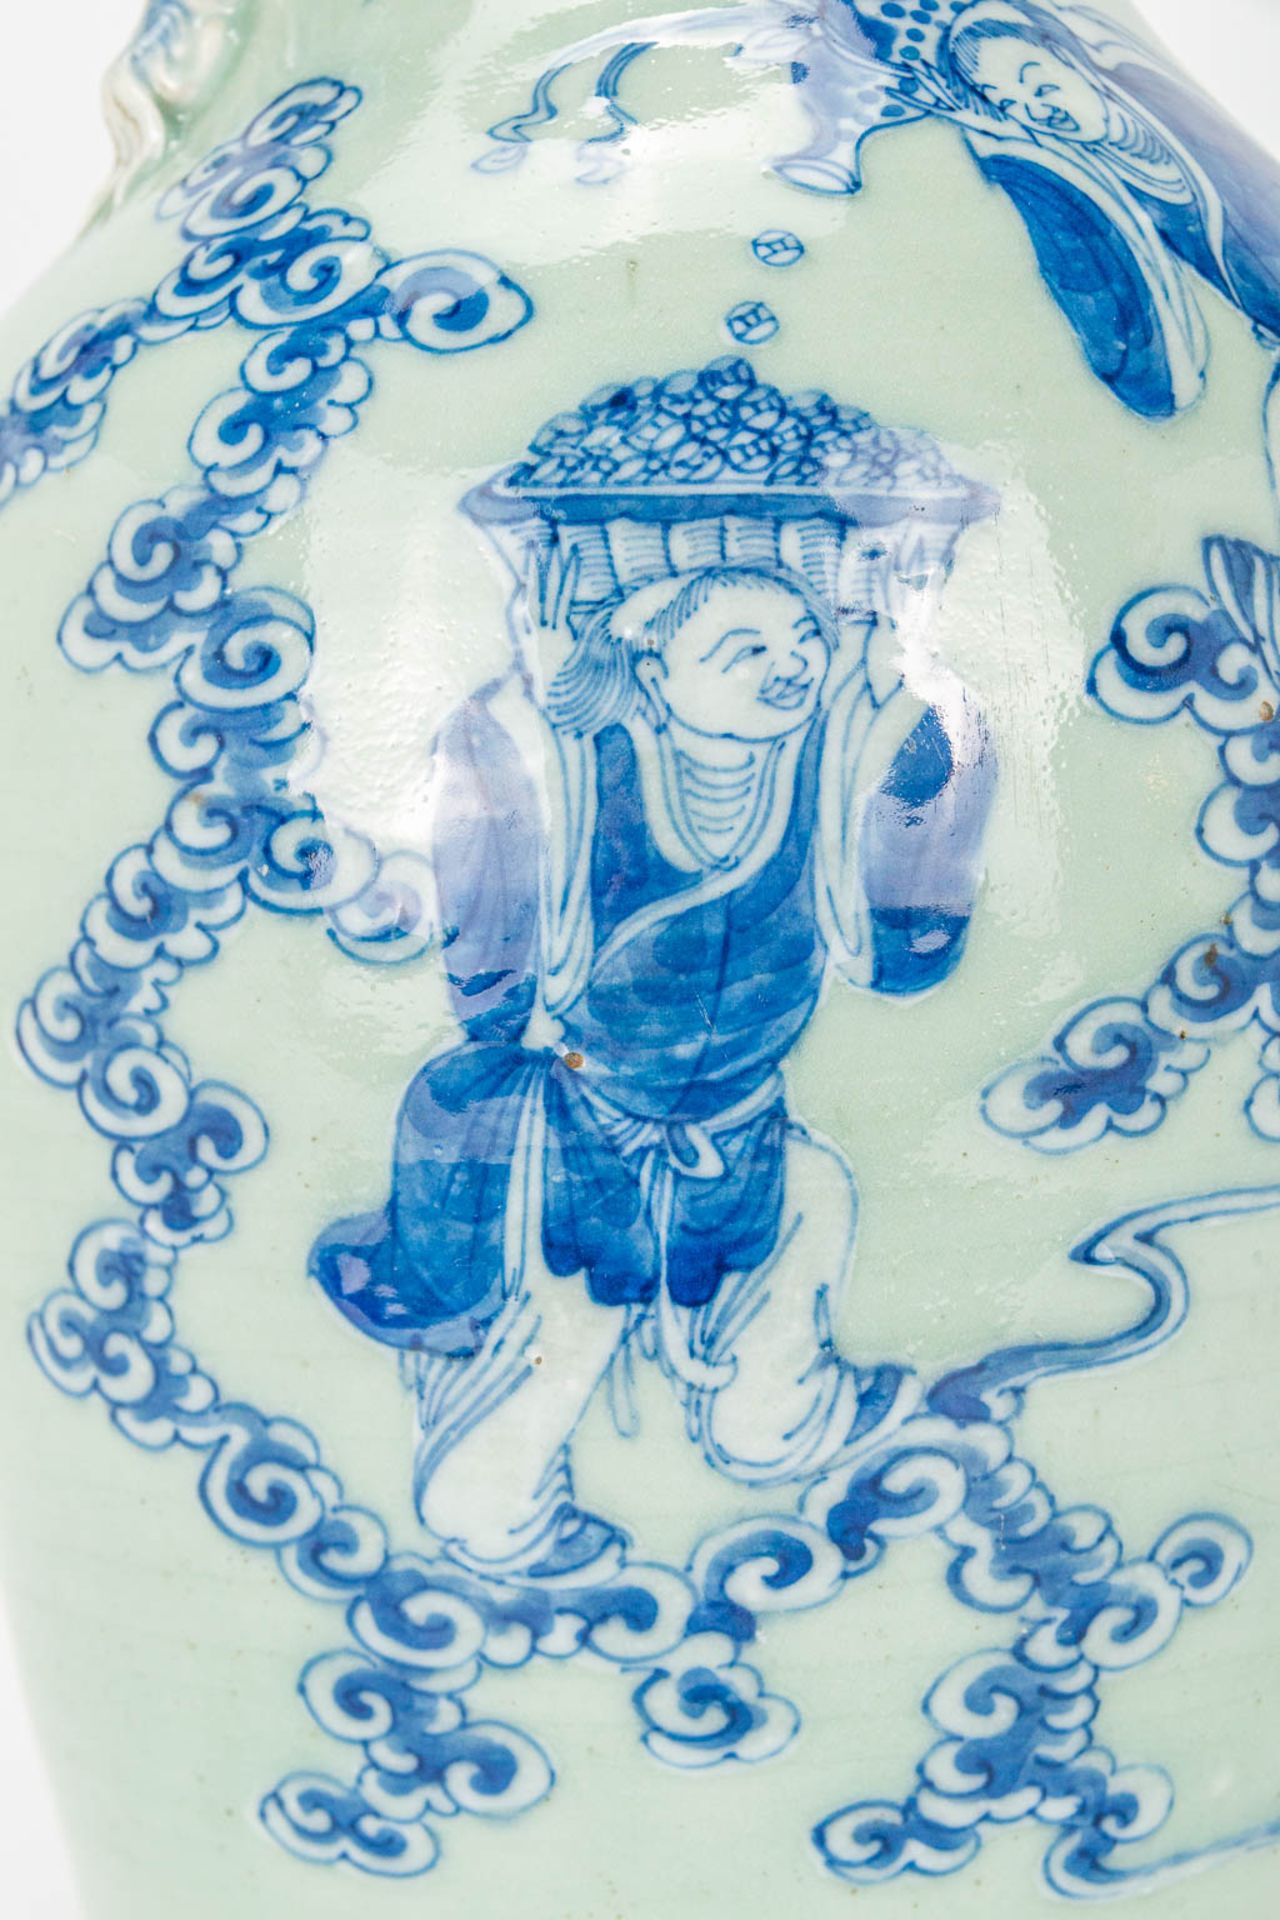 A vase made of Chinese porcelain with a blue-white decor. 19th/20th century. - Image 11 of 14